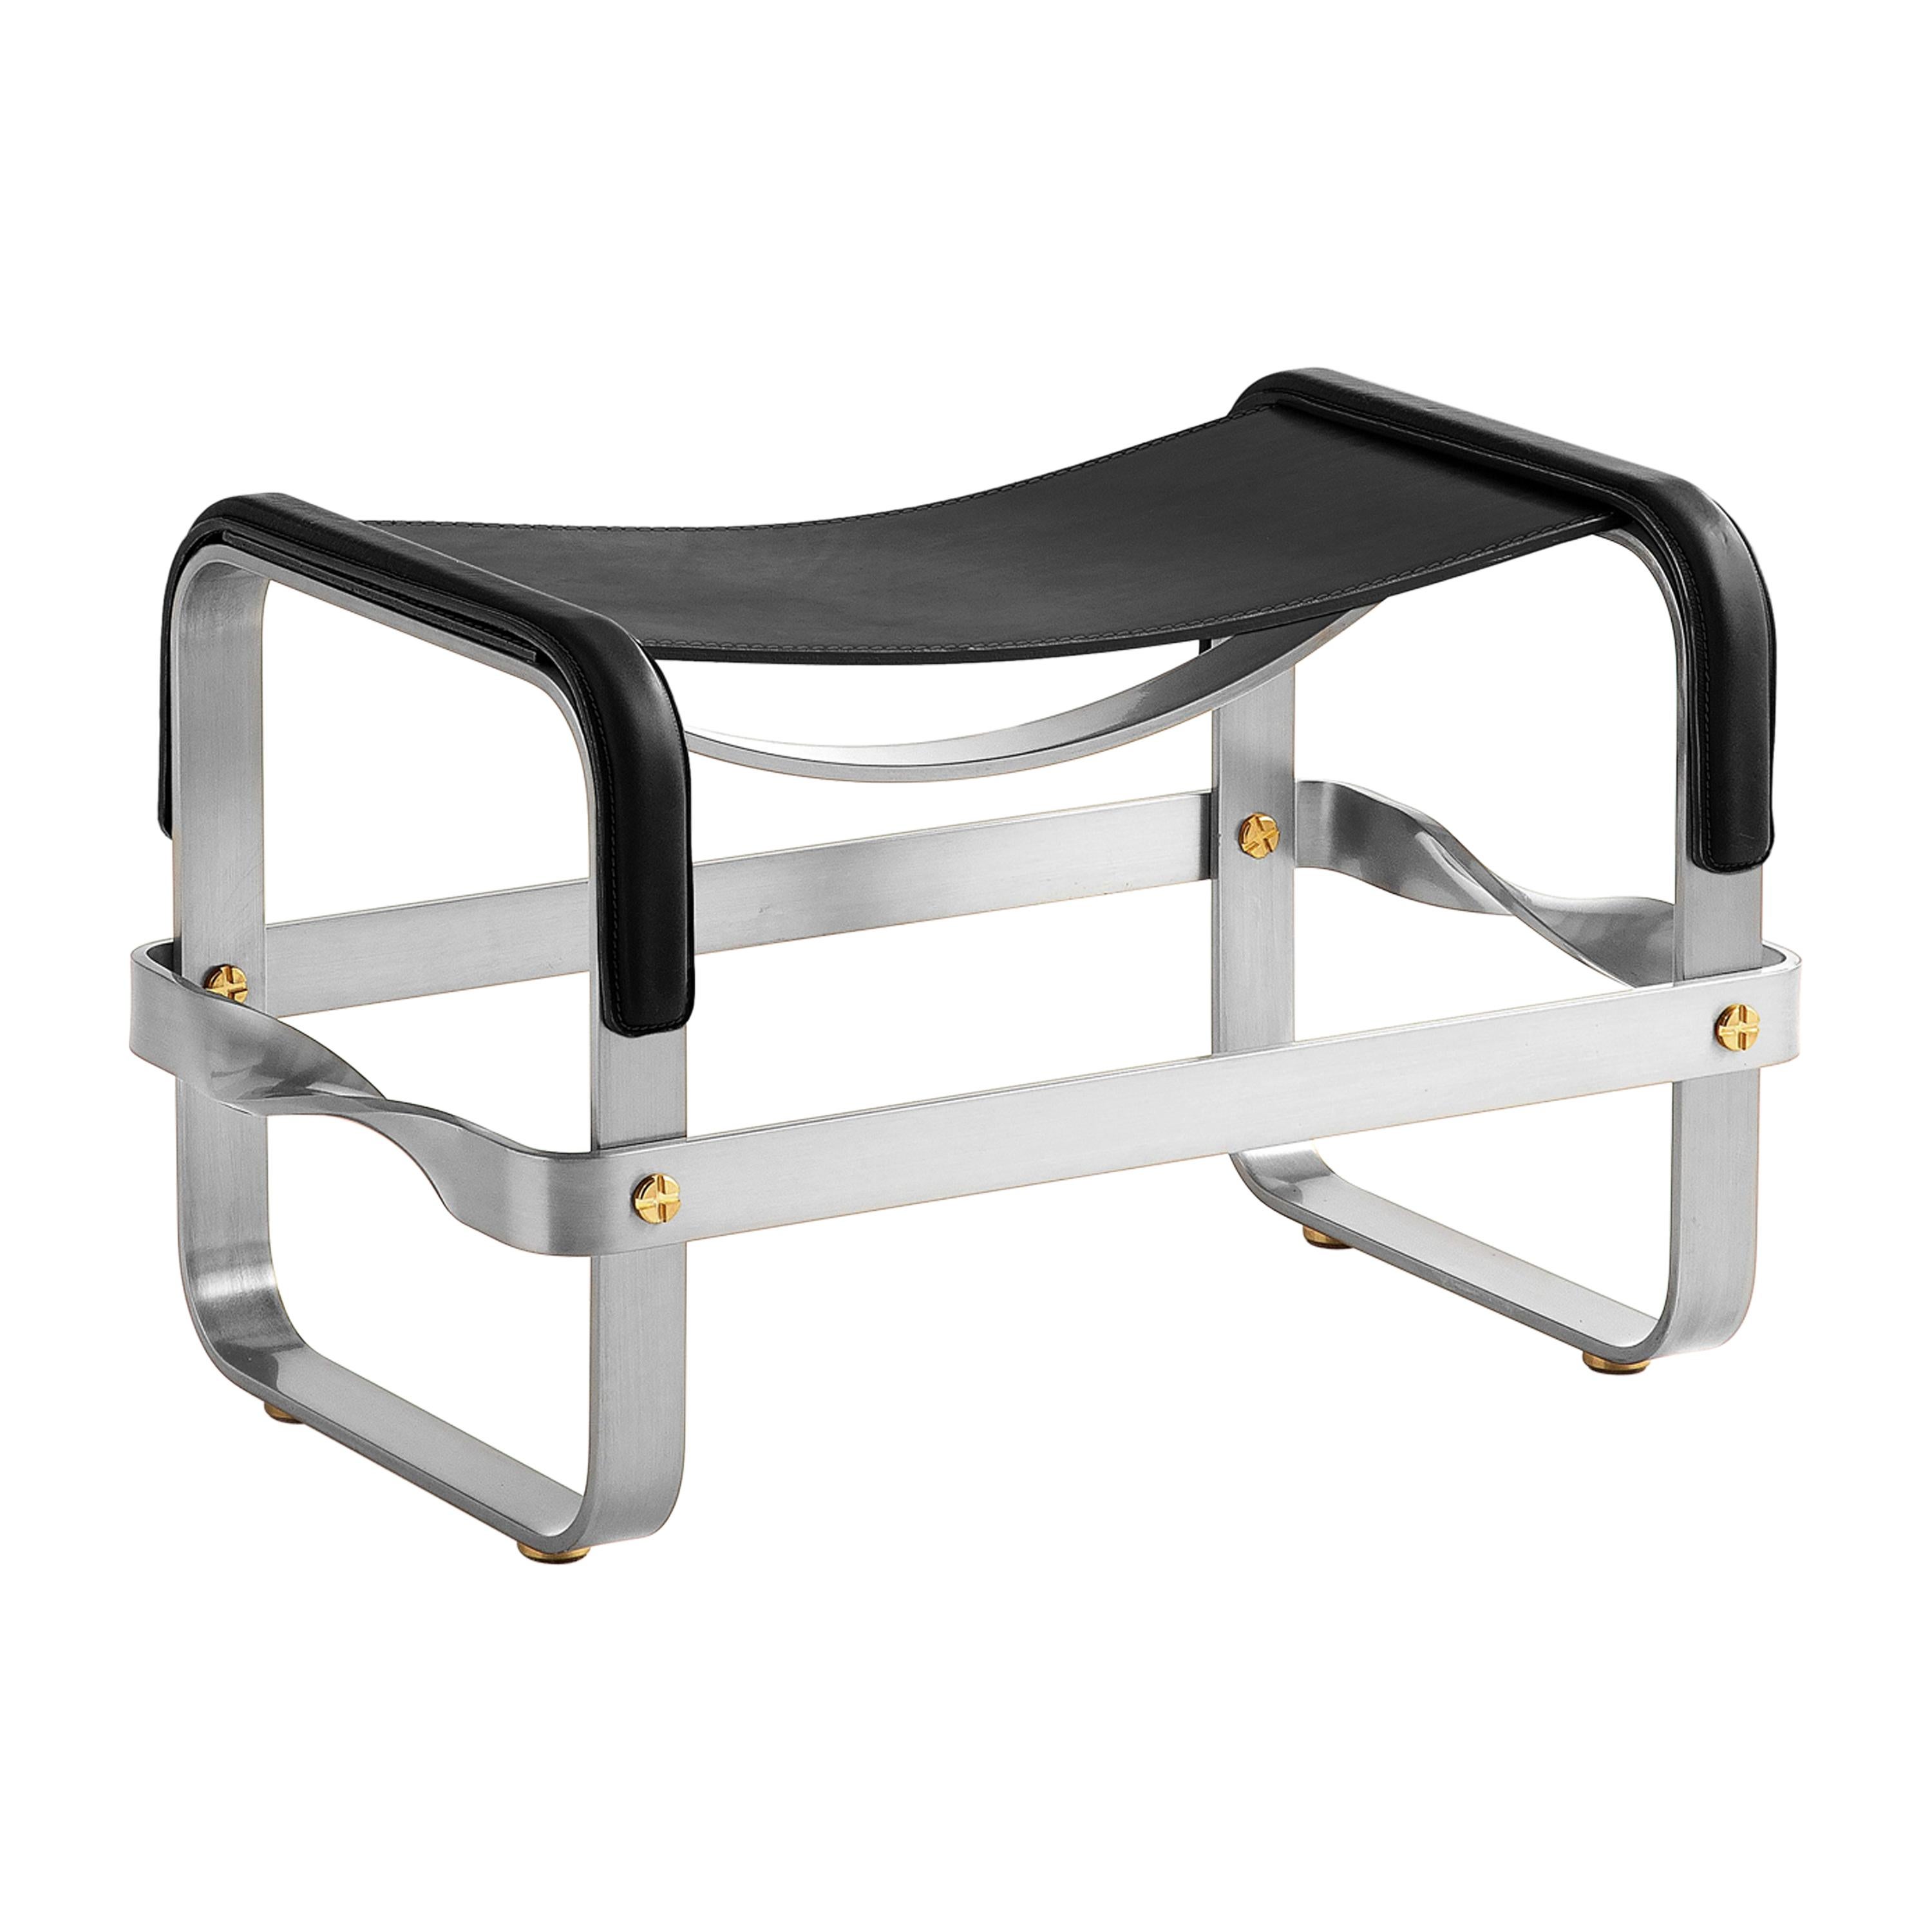 Footstool Old Silver Steel & Black Saddle Leather, Contemporary Style For Sale